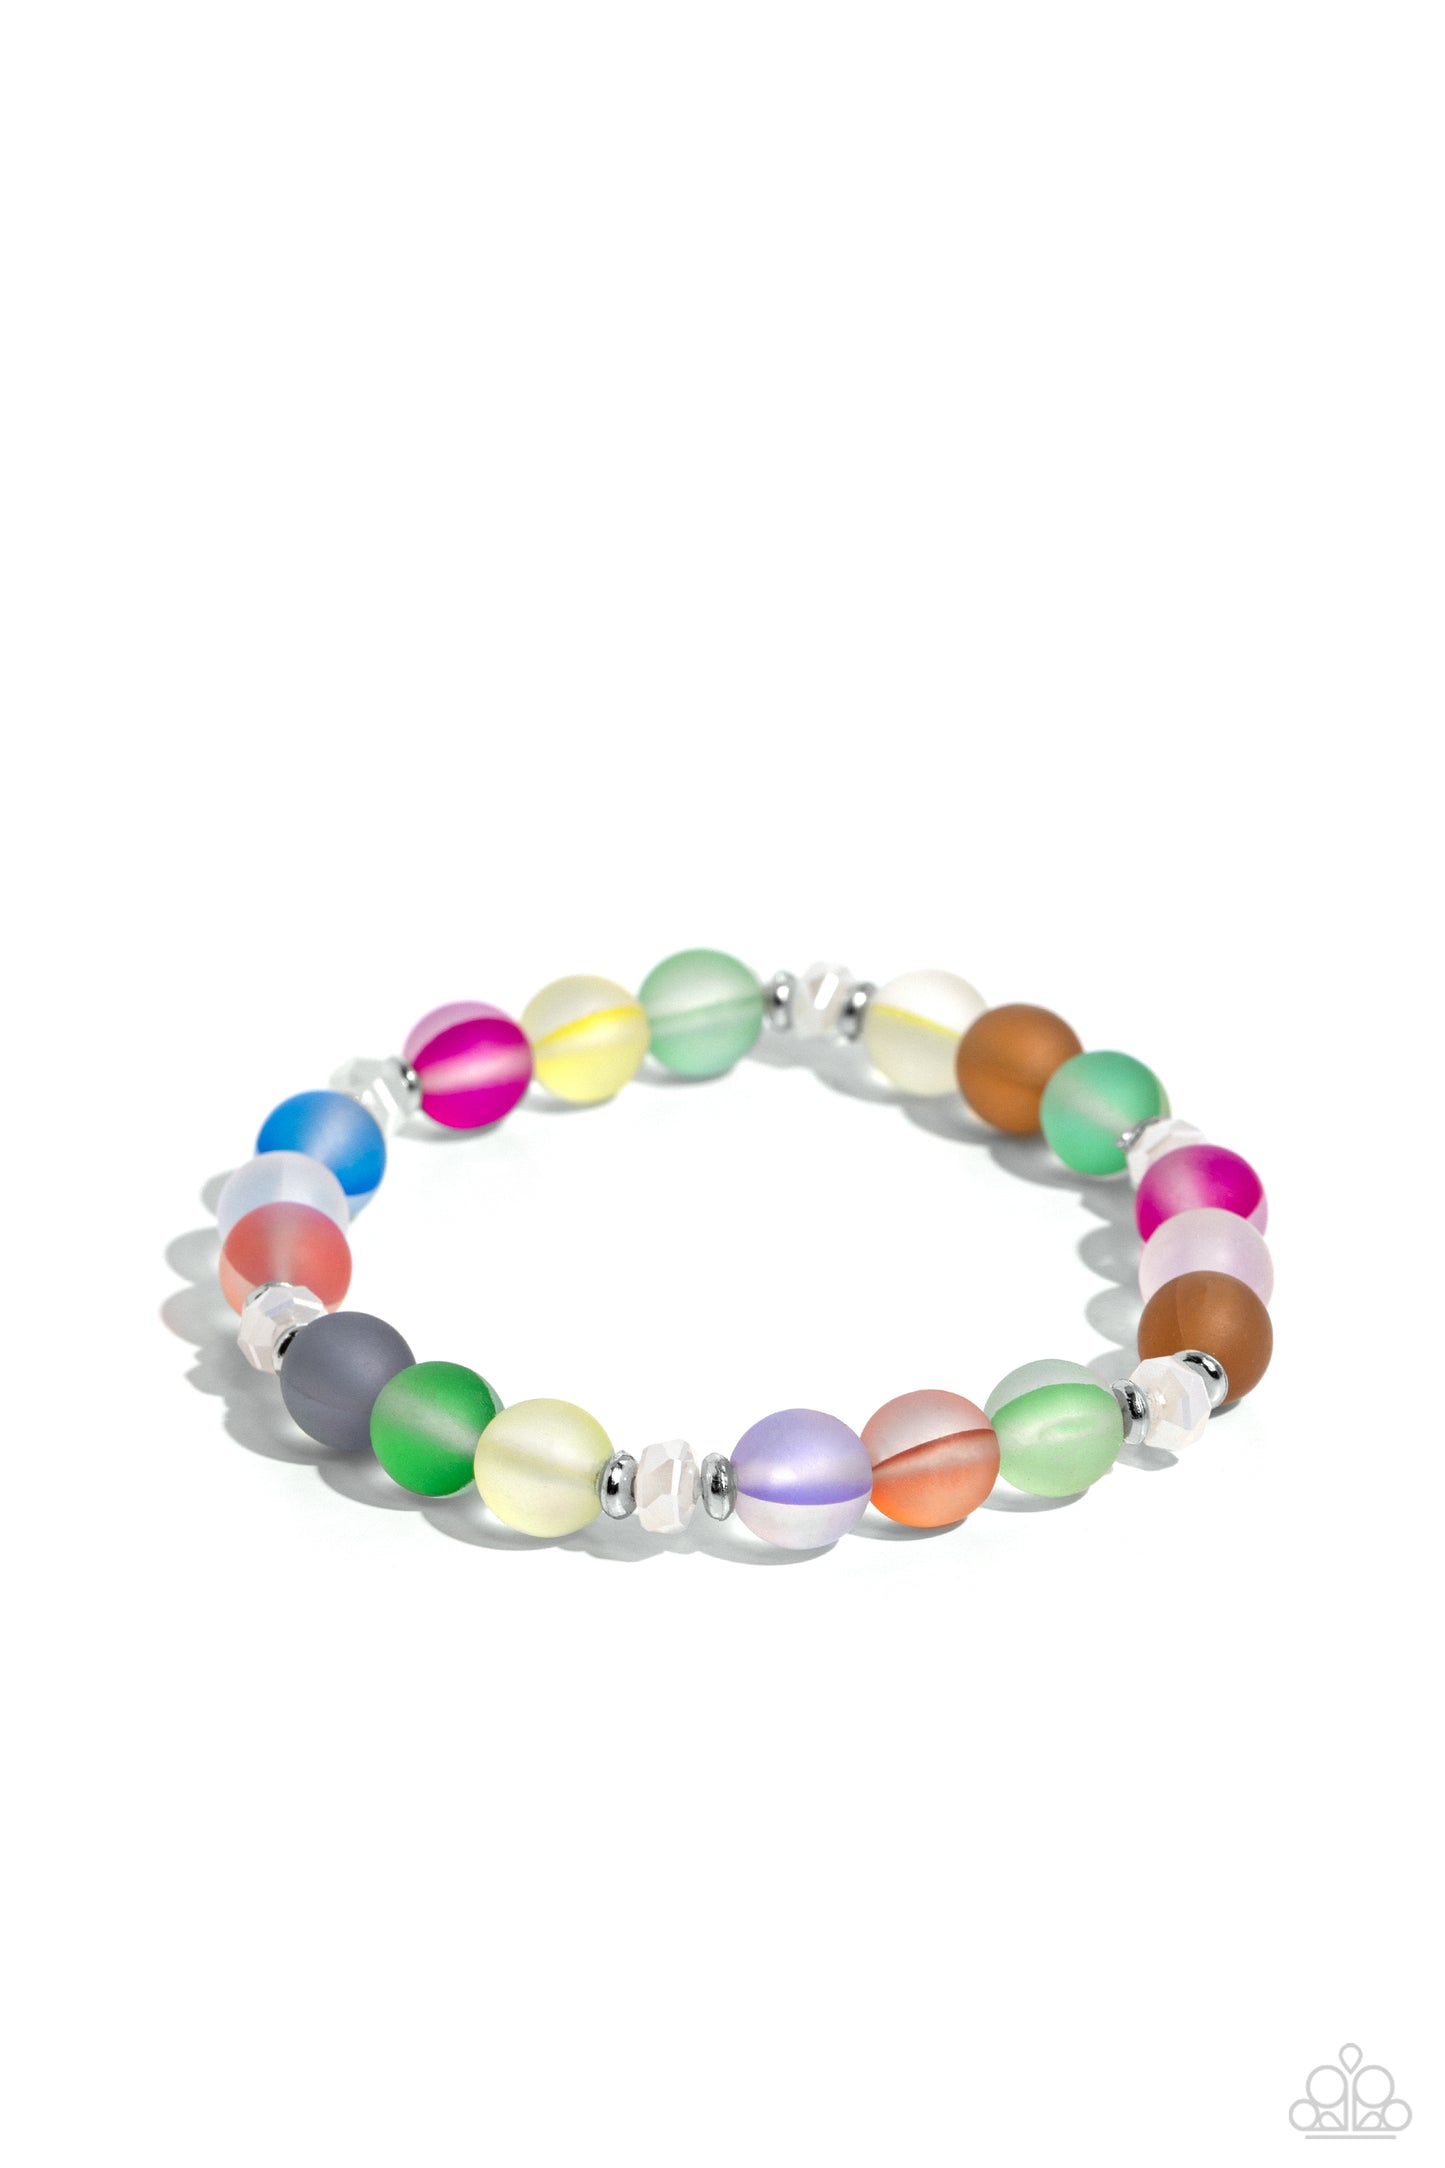 Paparazzi Accessories - Mermaid Mirage - Multi Bracelets infused with silver accents and faceted white beads, a dreamy collection of frosted glassy multicolored beads is threaded along a stretchy band around the wrist for an enchanting glow.  Sold as one individual bracelet.  Order date 10/1/23